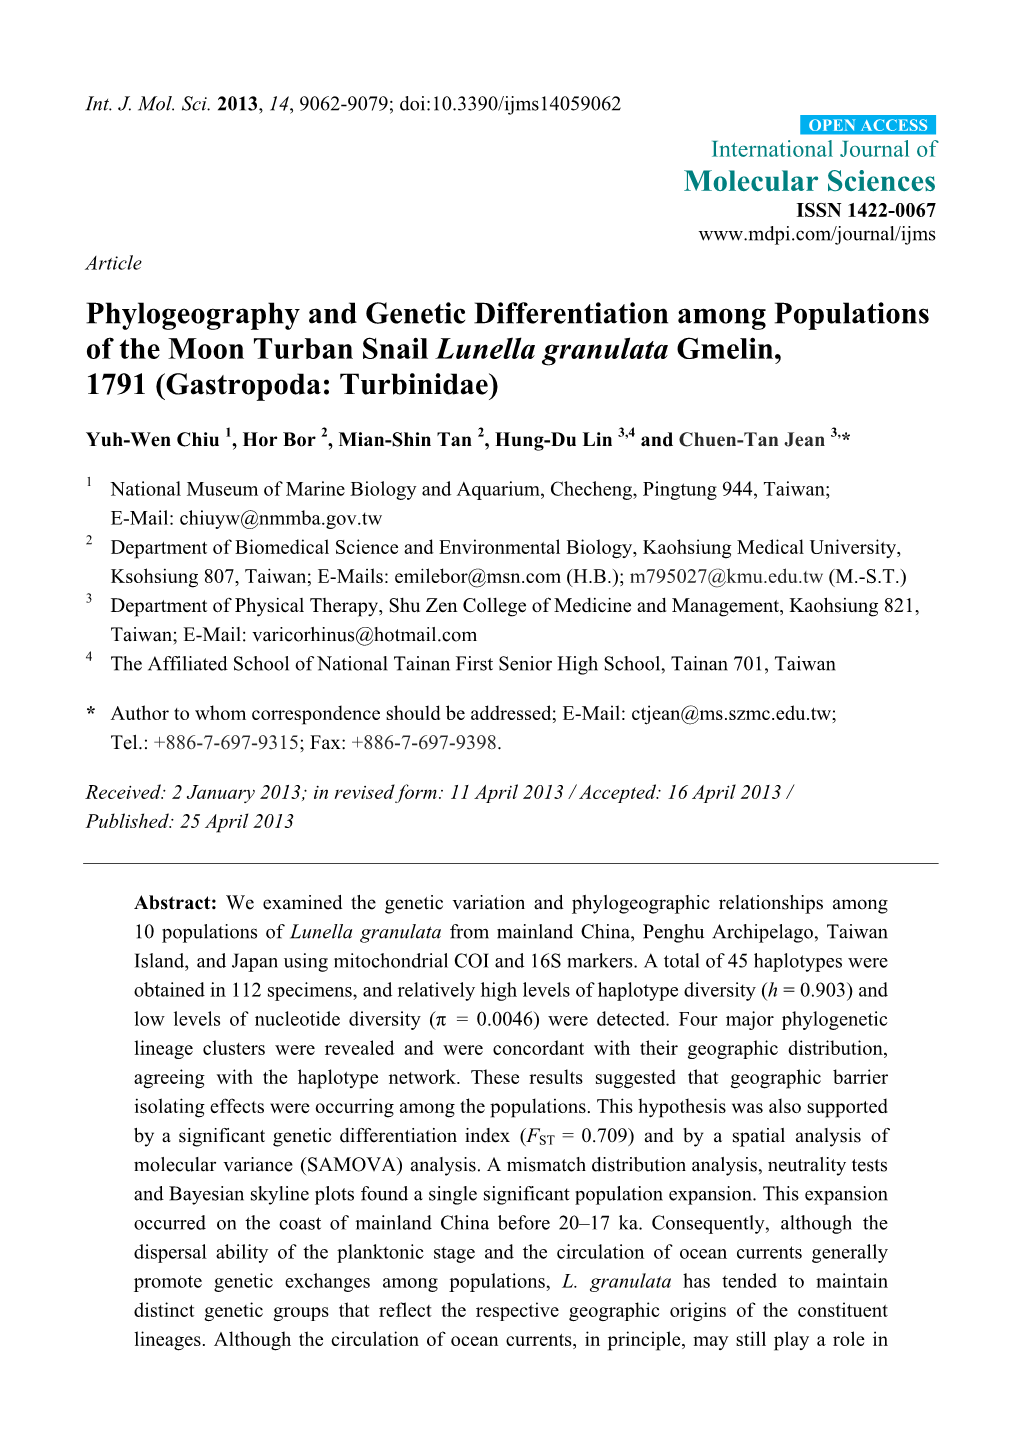 Phylogeography and Genetic Differentiation Among Populations of the Moon Turban Snail Lunella Granulata Gmelin, 1791 (Gastropoda: Turbinidae)